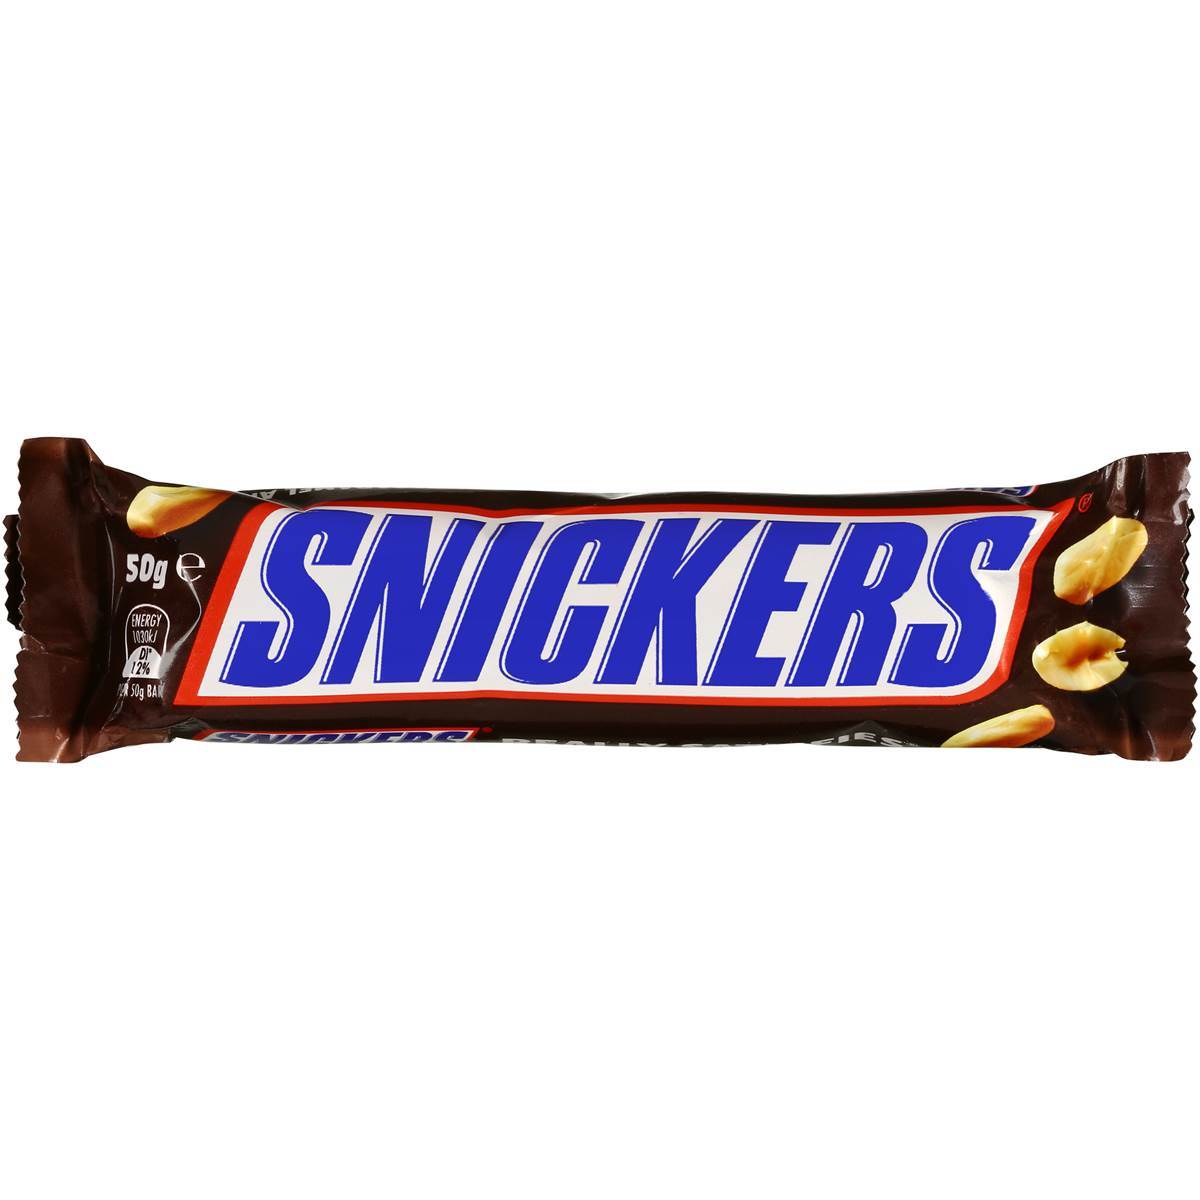 Snickers 50g Single  32665.1519945996.1280.1280 (1)